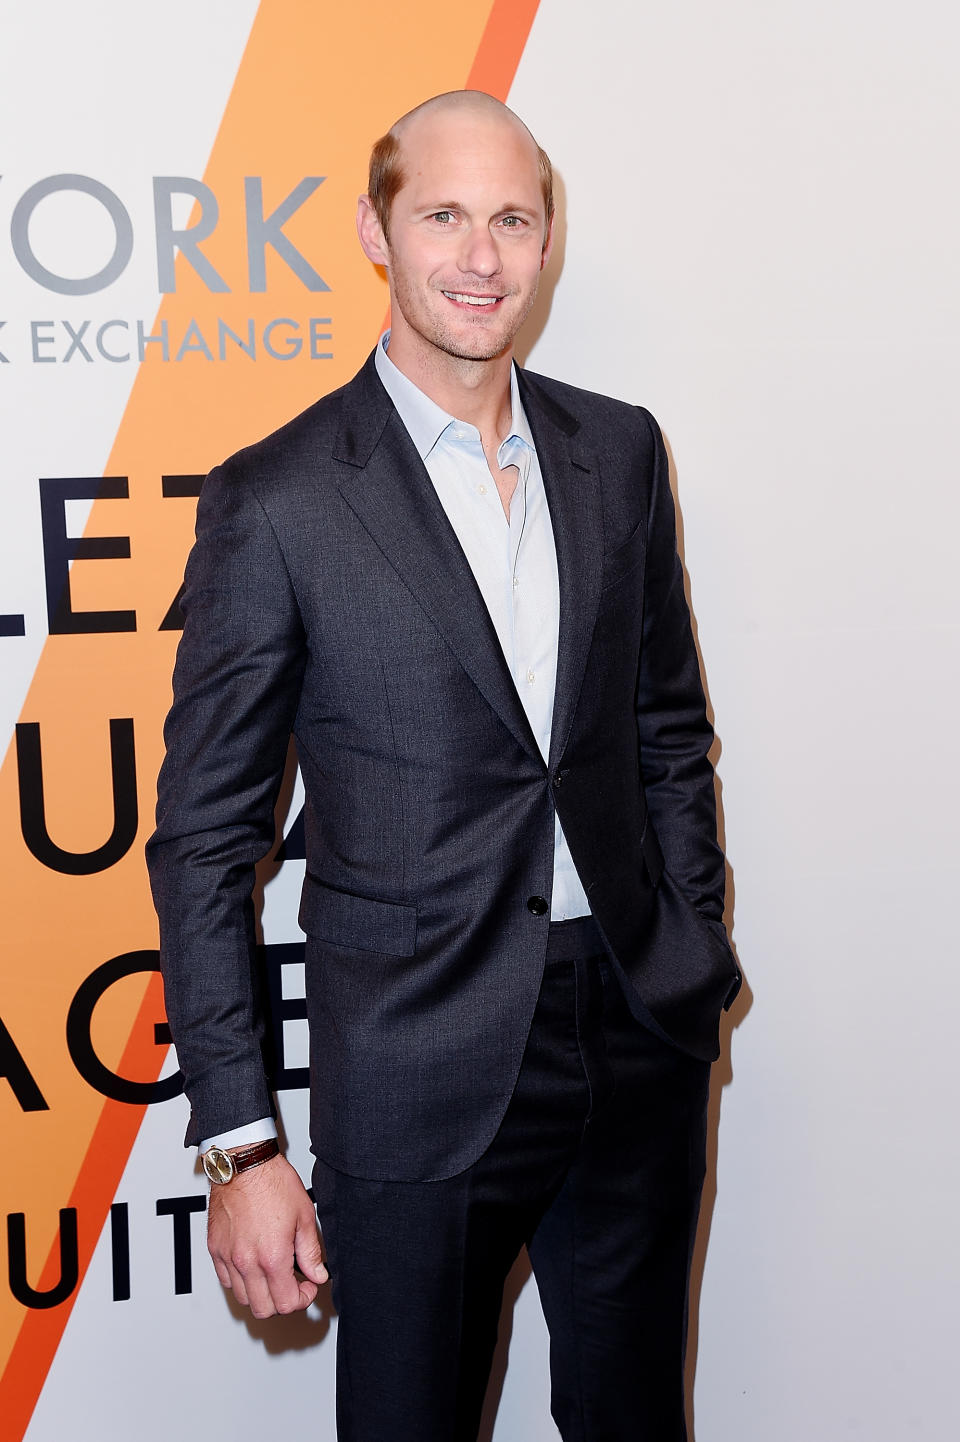 Alexander Skarsgård wearing his new ’do and a dark gray suit at the Louis Vuitton “Voyez, Voguez, Voyagez” event red carpet Thursday night in New York. (Photo: Getty Images)